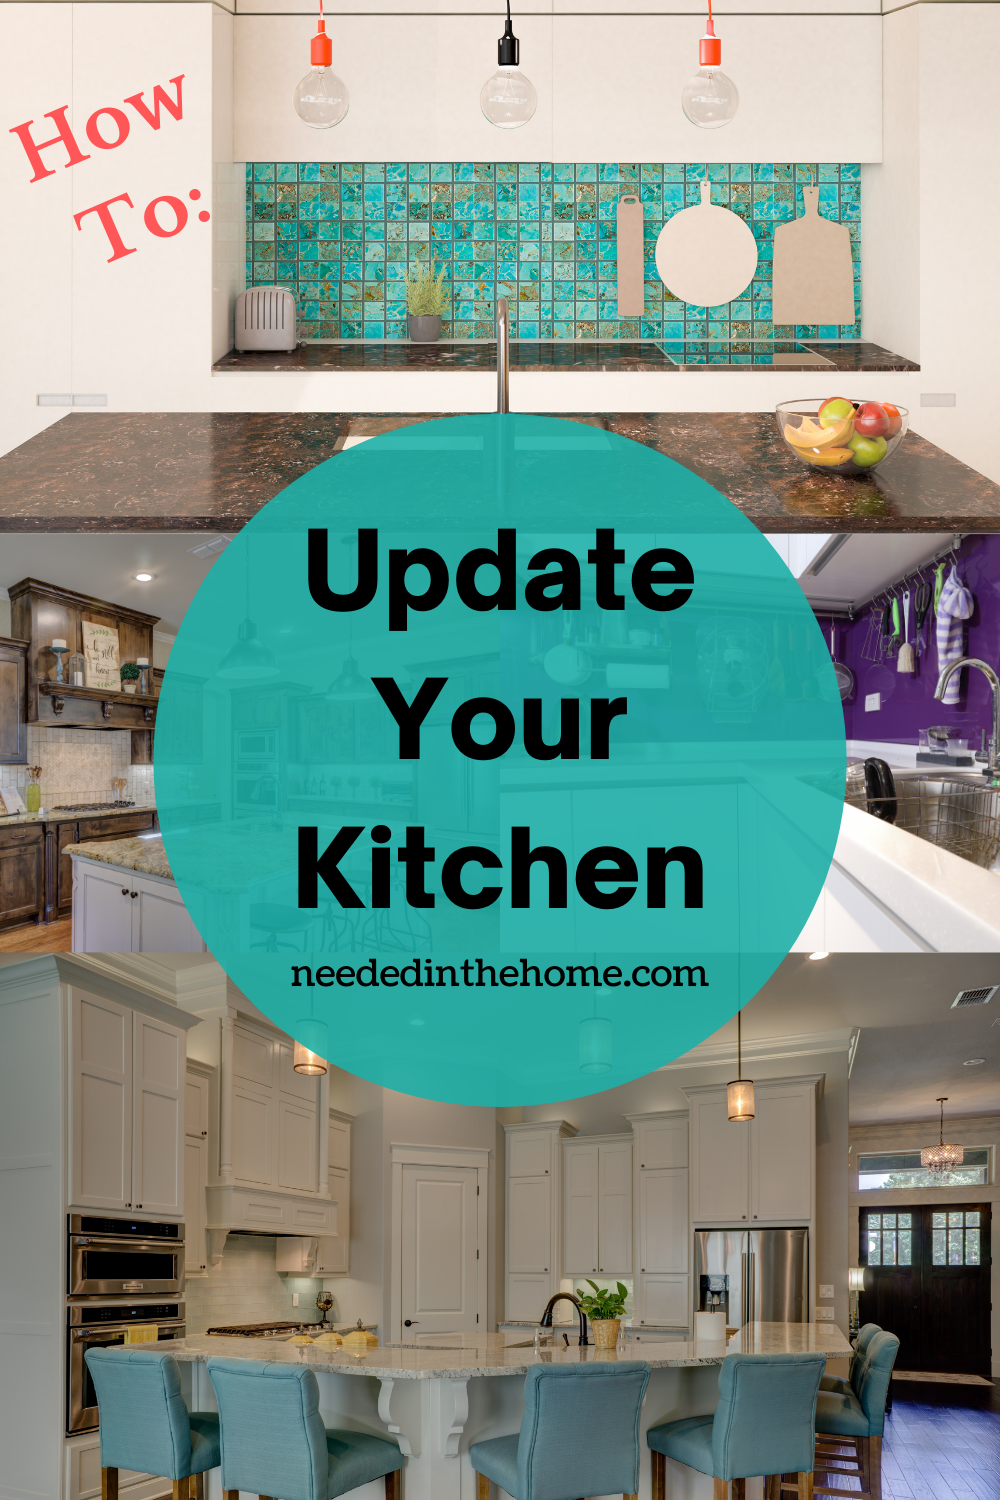 Update Your Kitchen images of updated kitchens neededinthehome